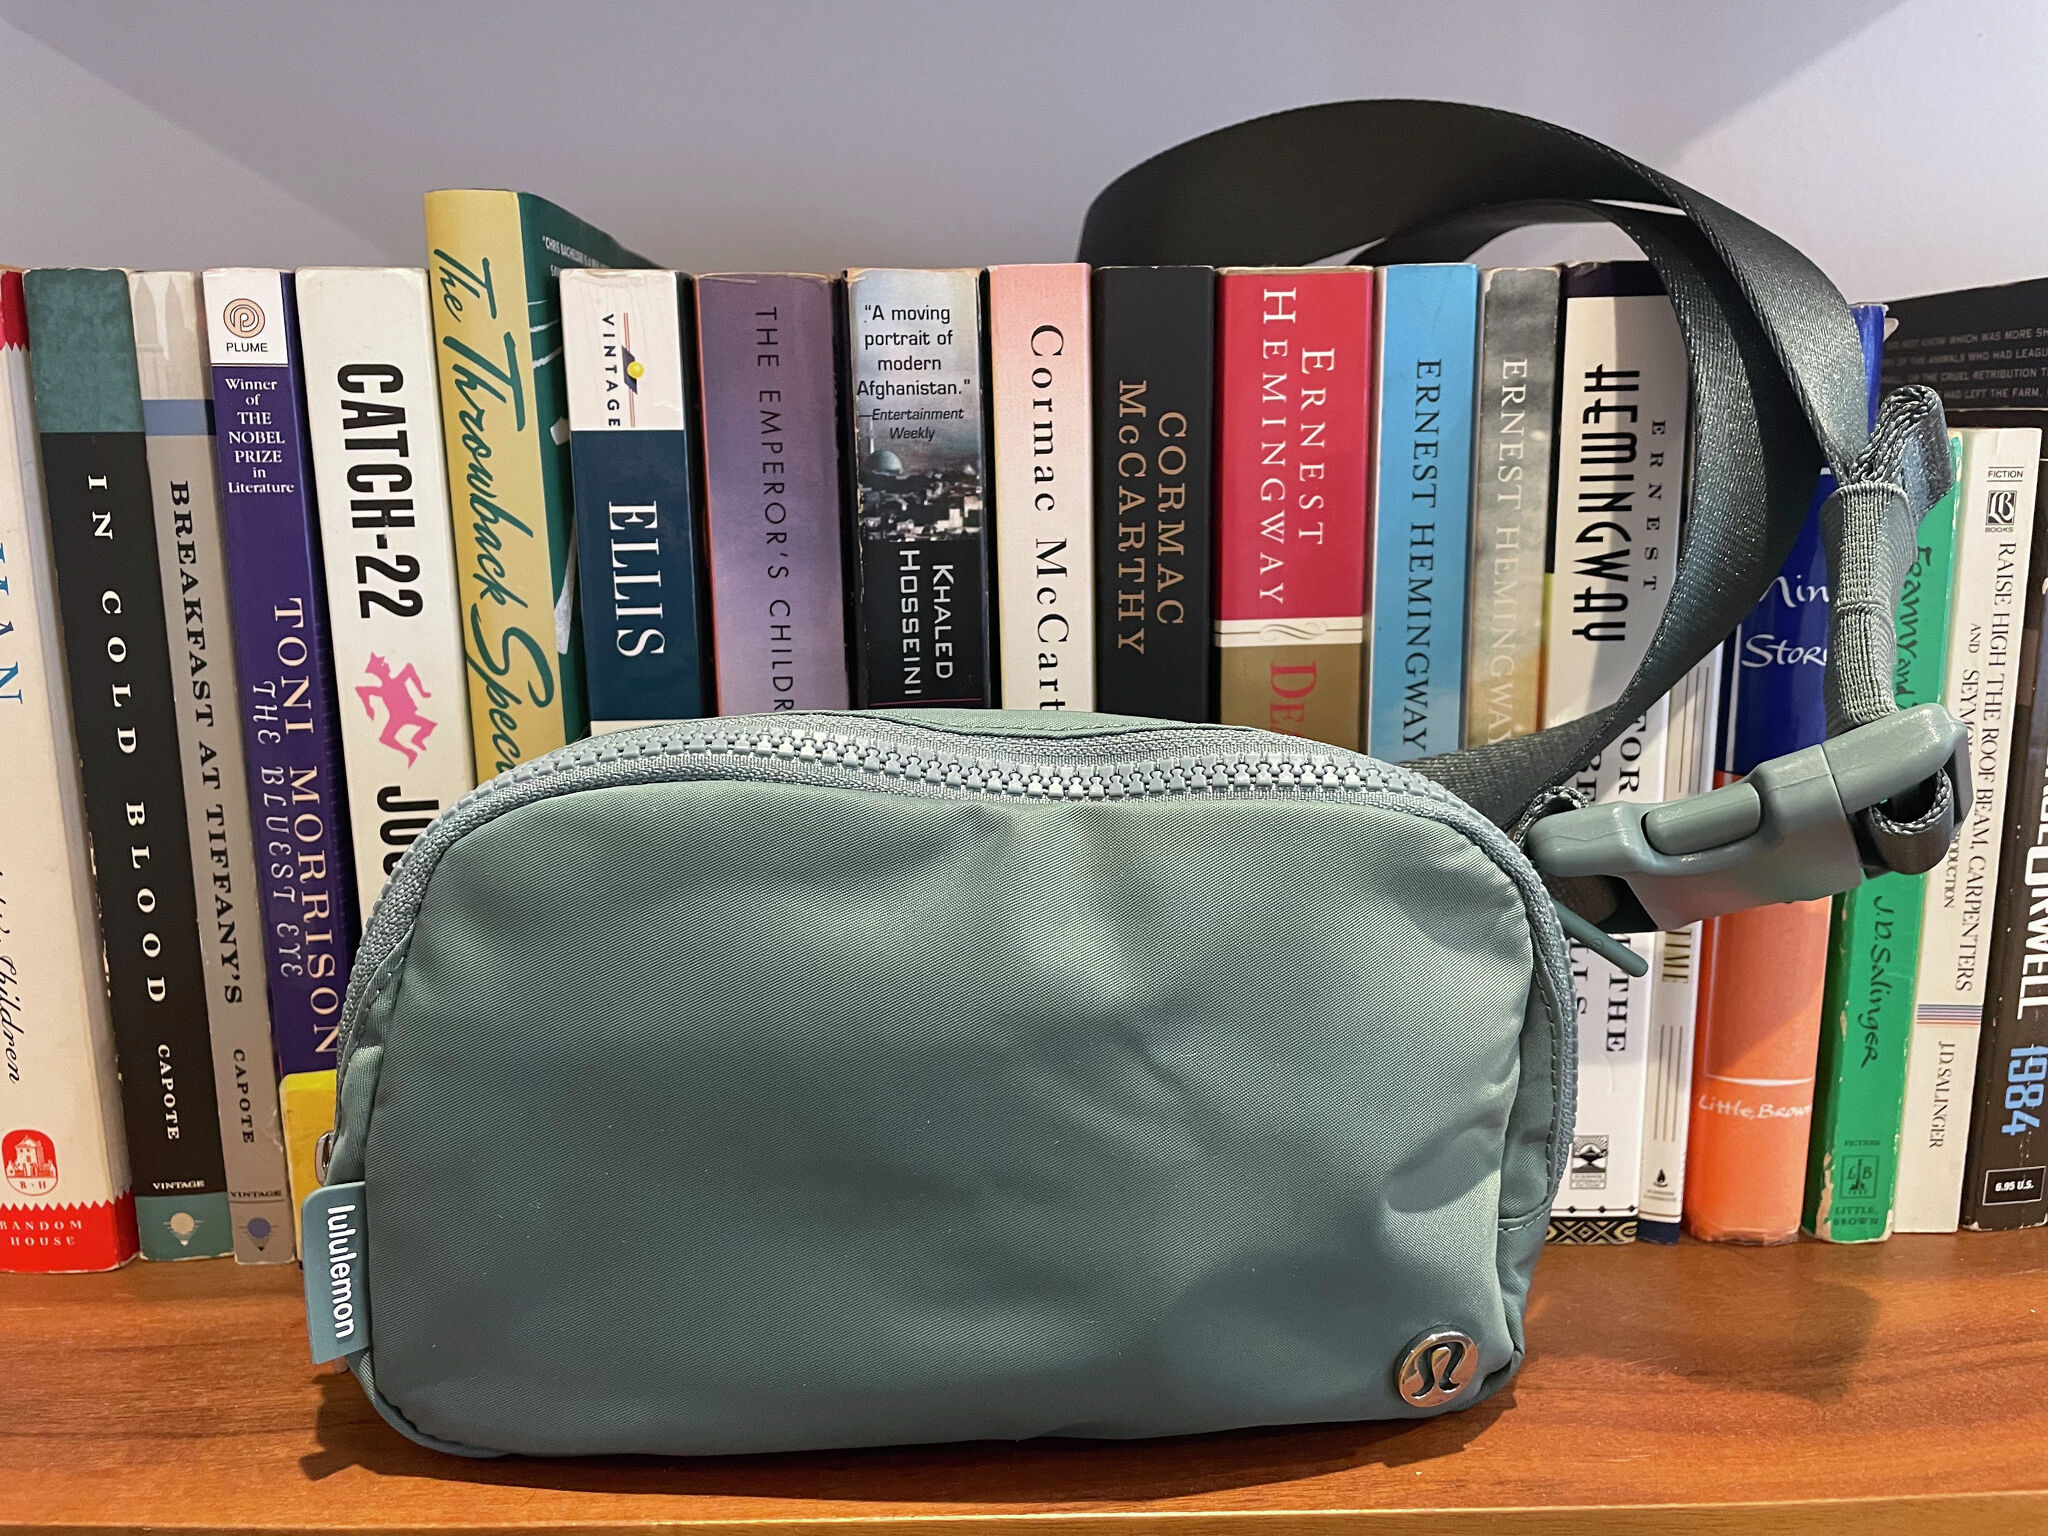 7 Simple Ways To Style The Lululemon Belt Bag For Spring